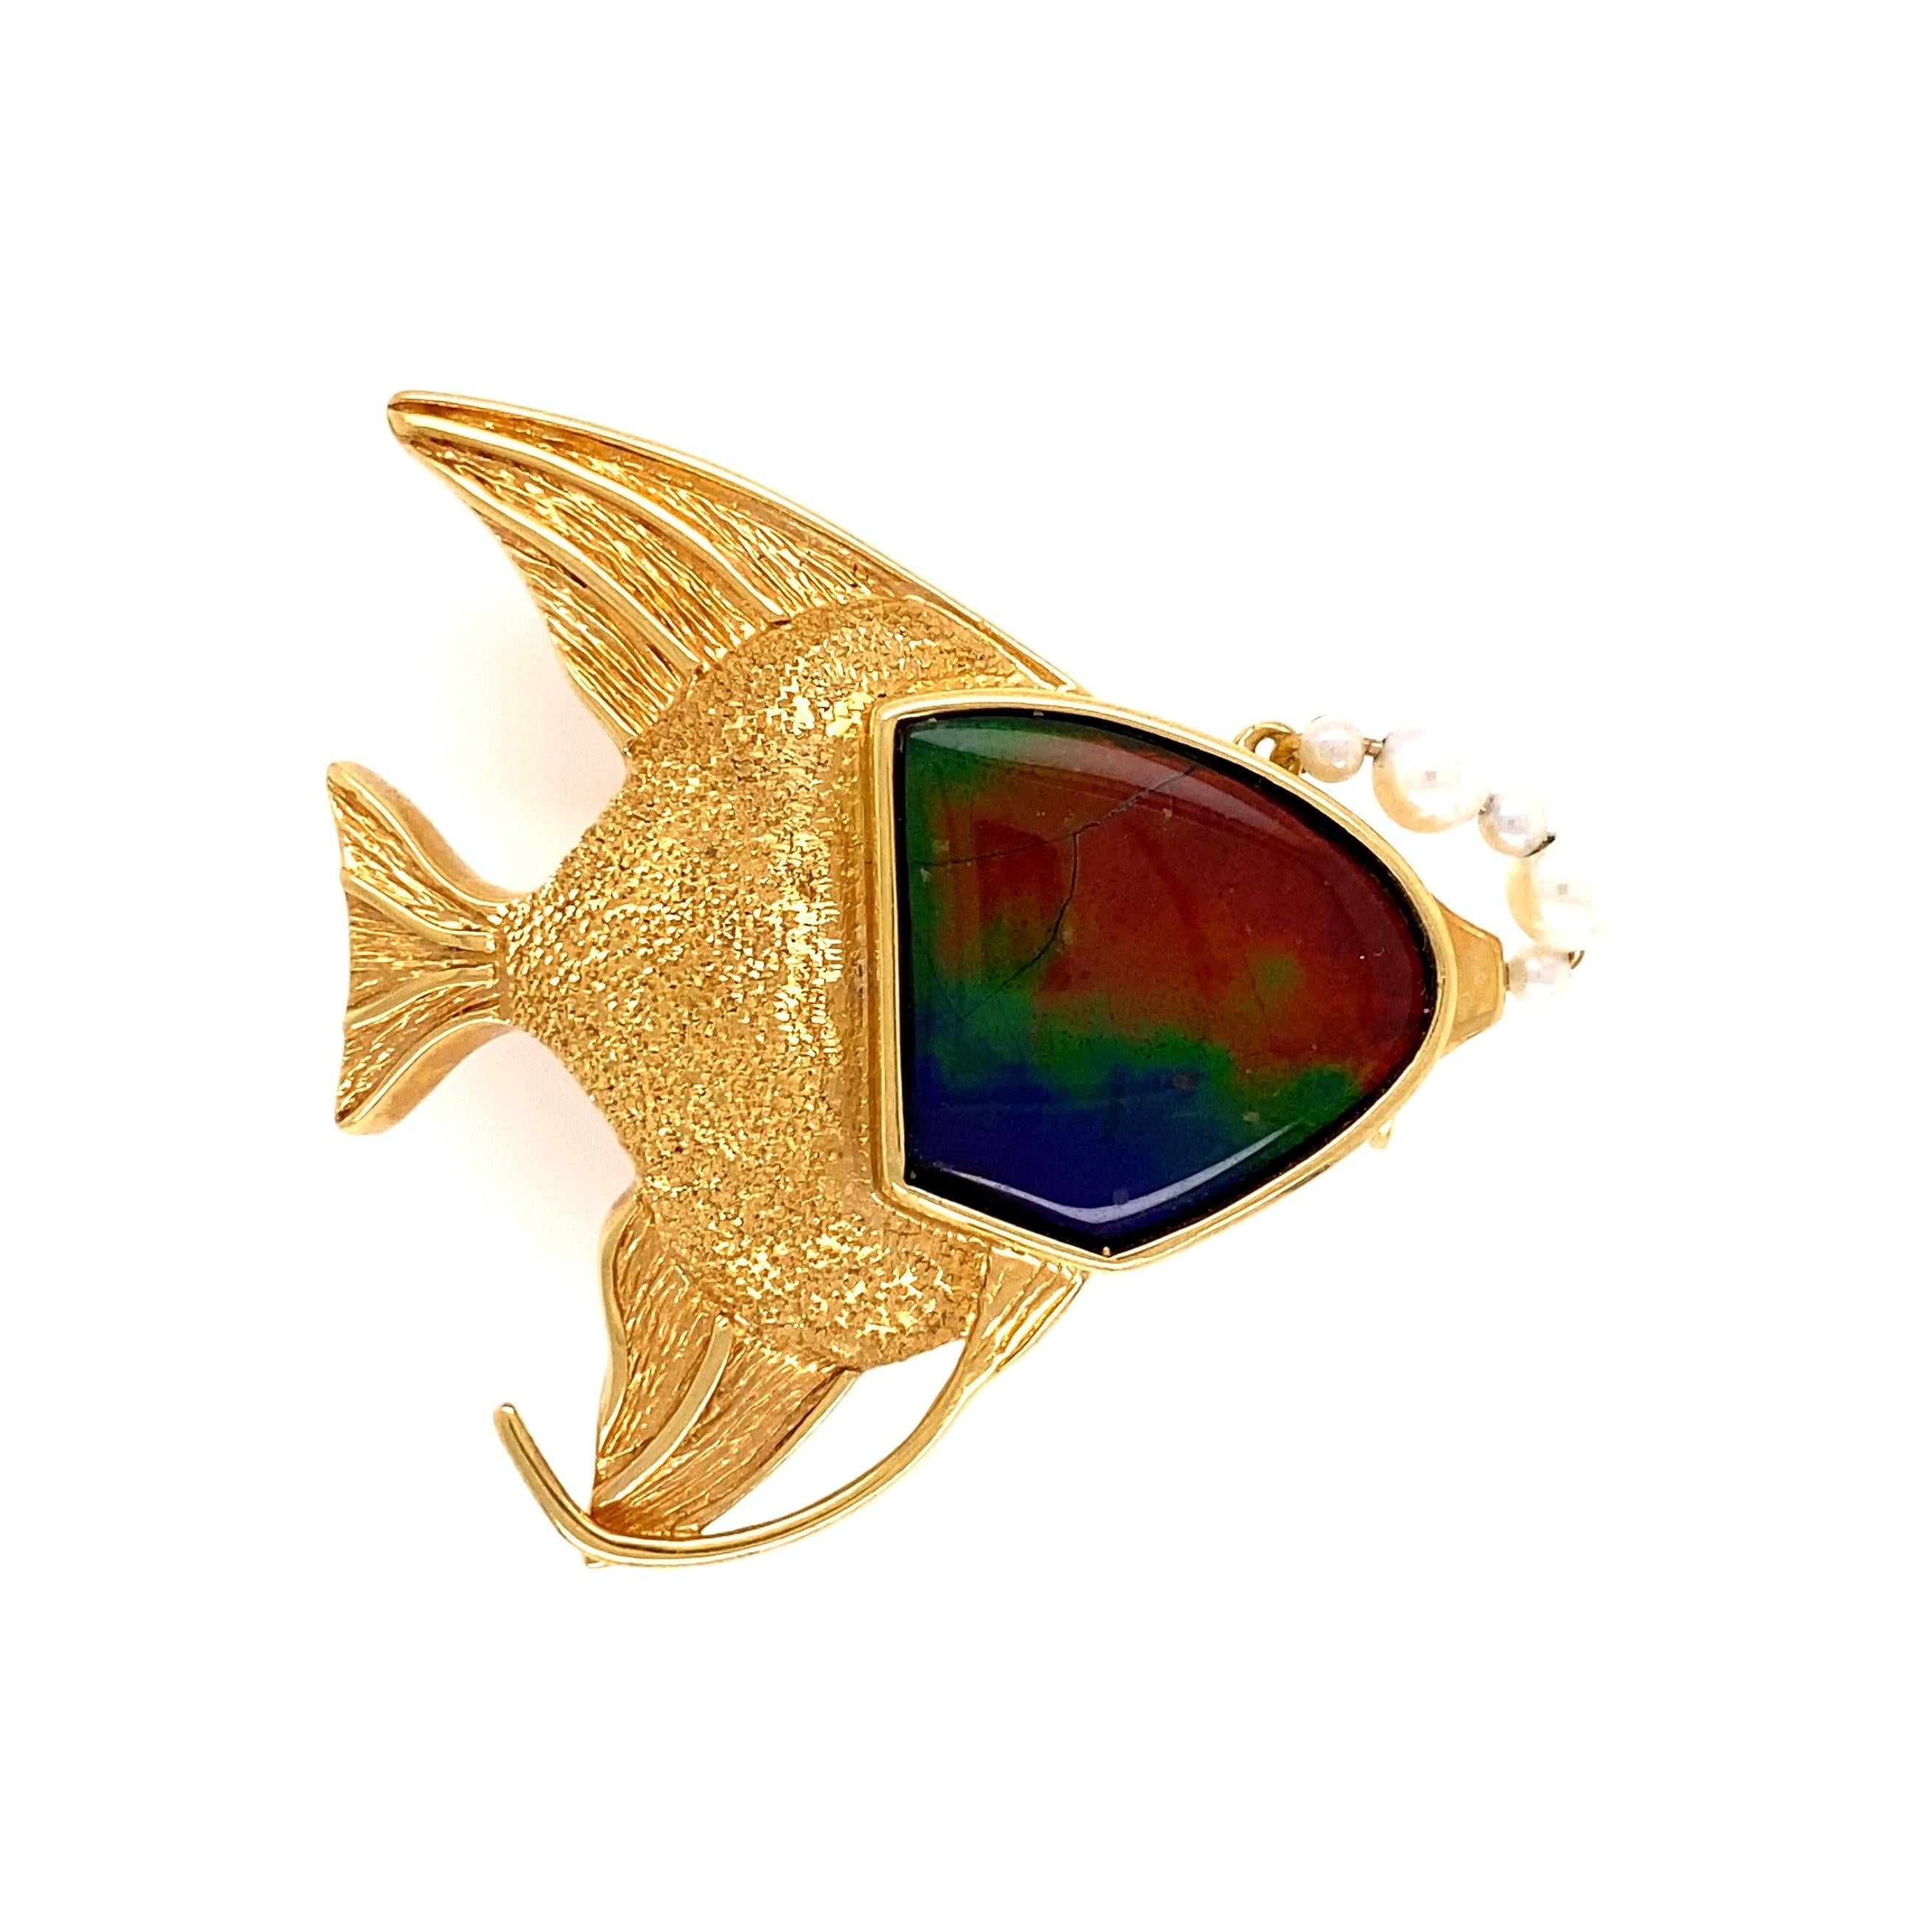 Awesome Gold Fish Pendant. Hand set with an Ammolite, weighing approx. 10 Carats, accented by Pearls. Hand crafted in 18K Yellow Gold. Measuring approx. 1.5